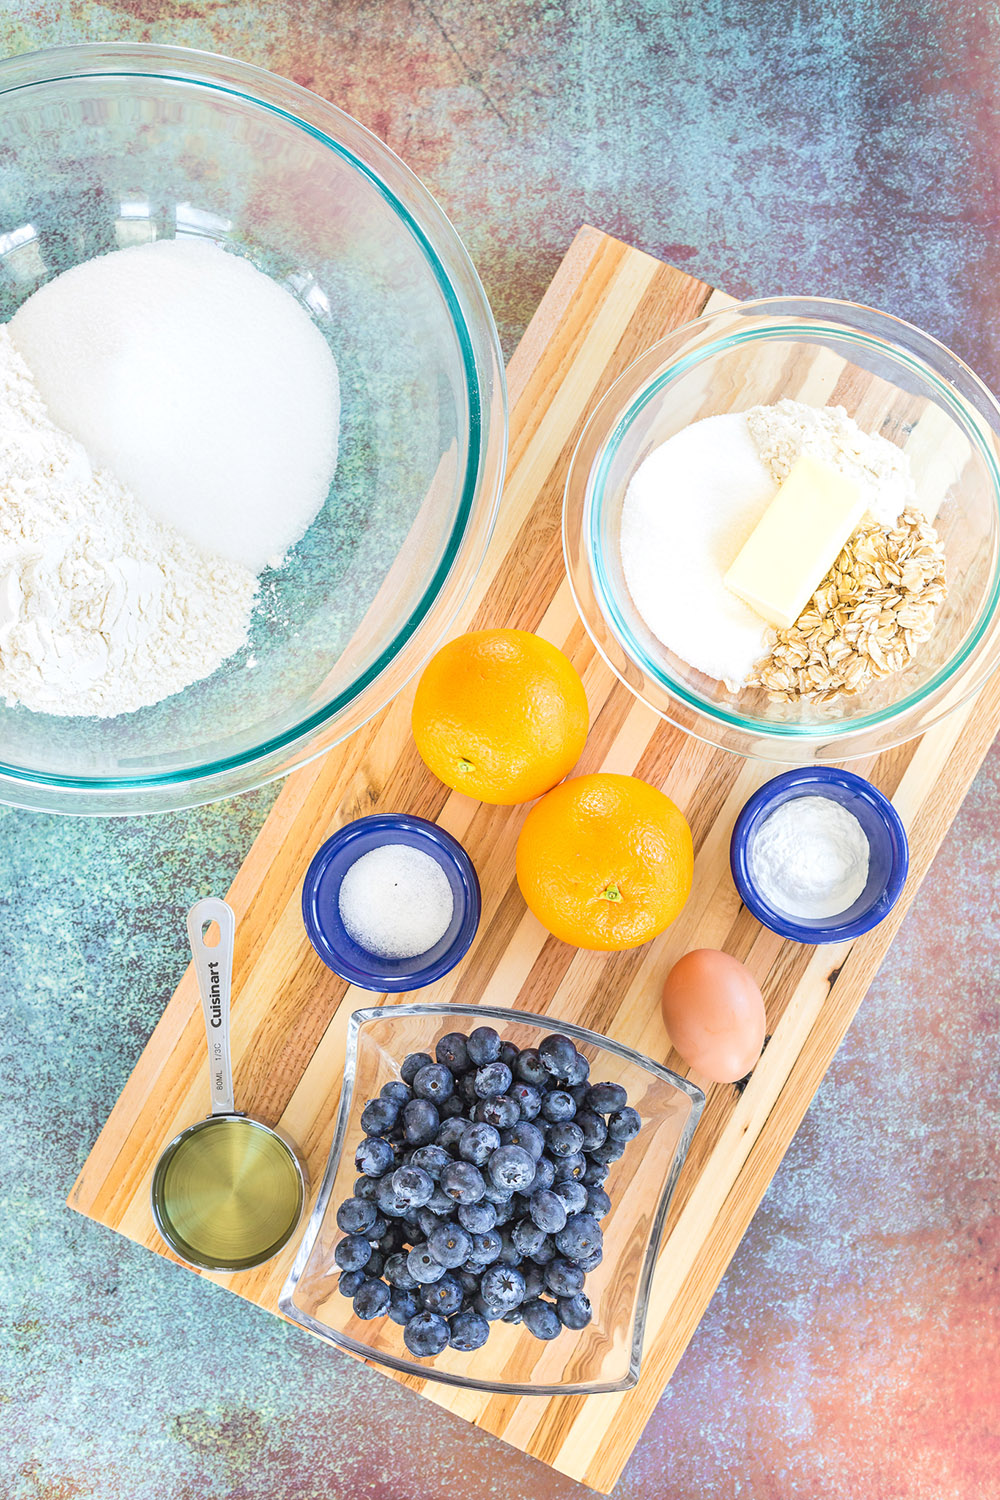 Oranges, blueberries, and other ingredients to make muffins on a board.